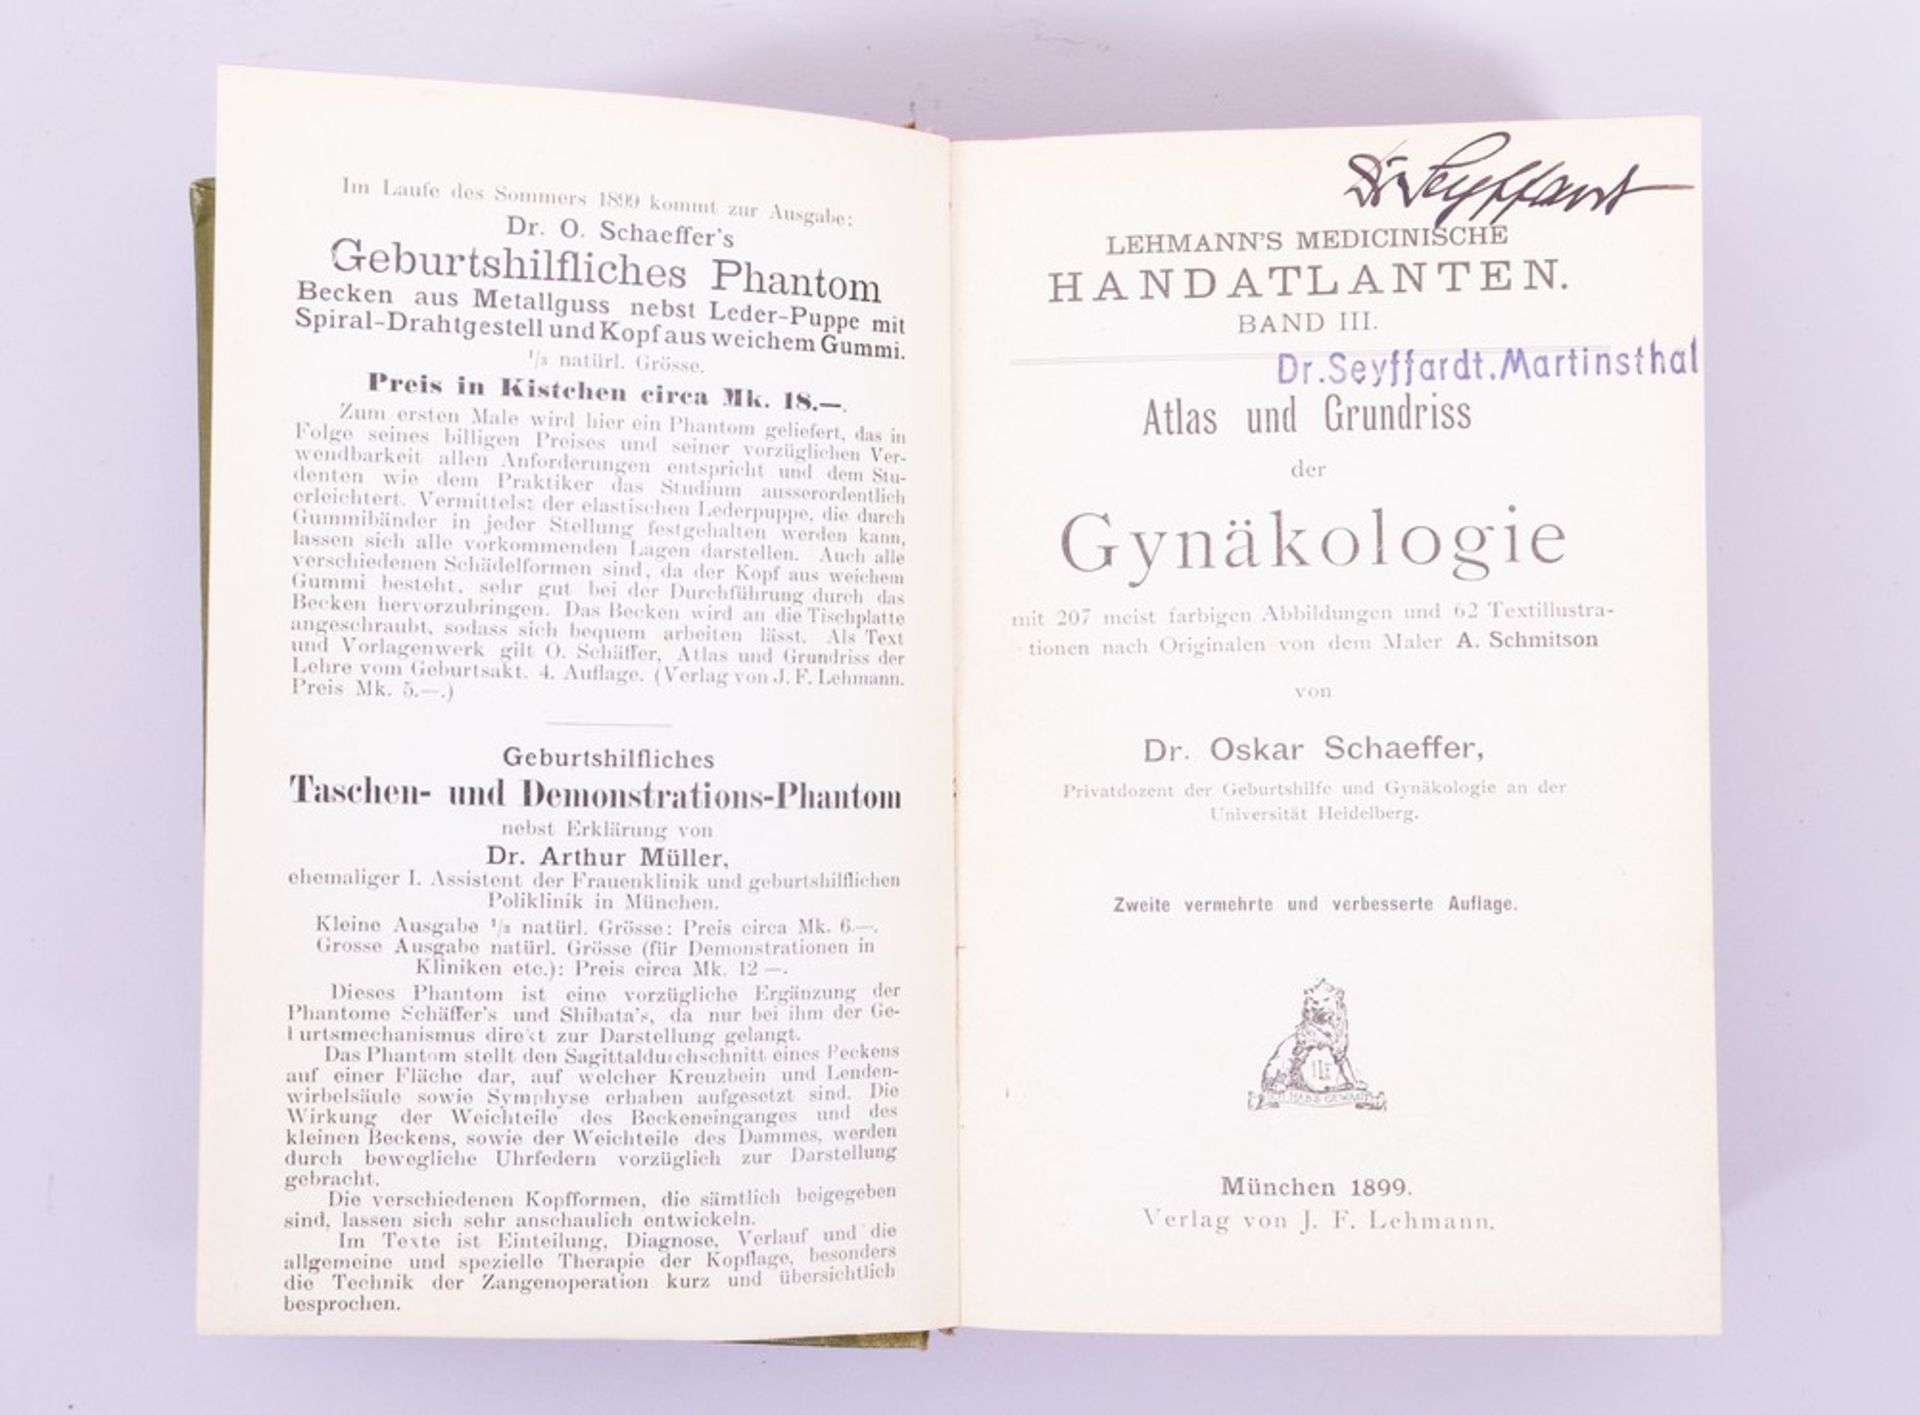 Book, Gynecology by Dr. O. Schäffer - Image 2 of 2